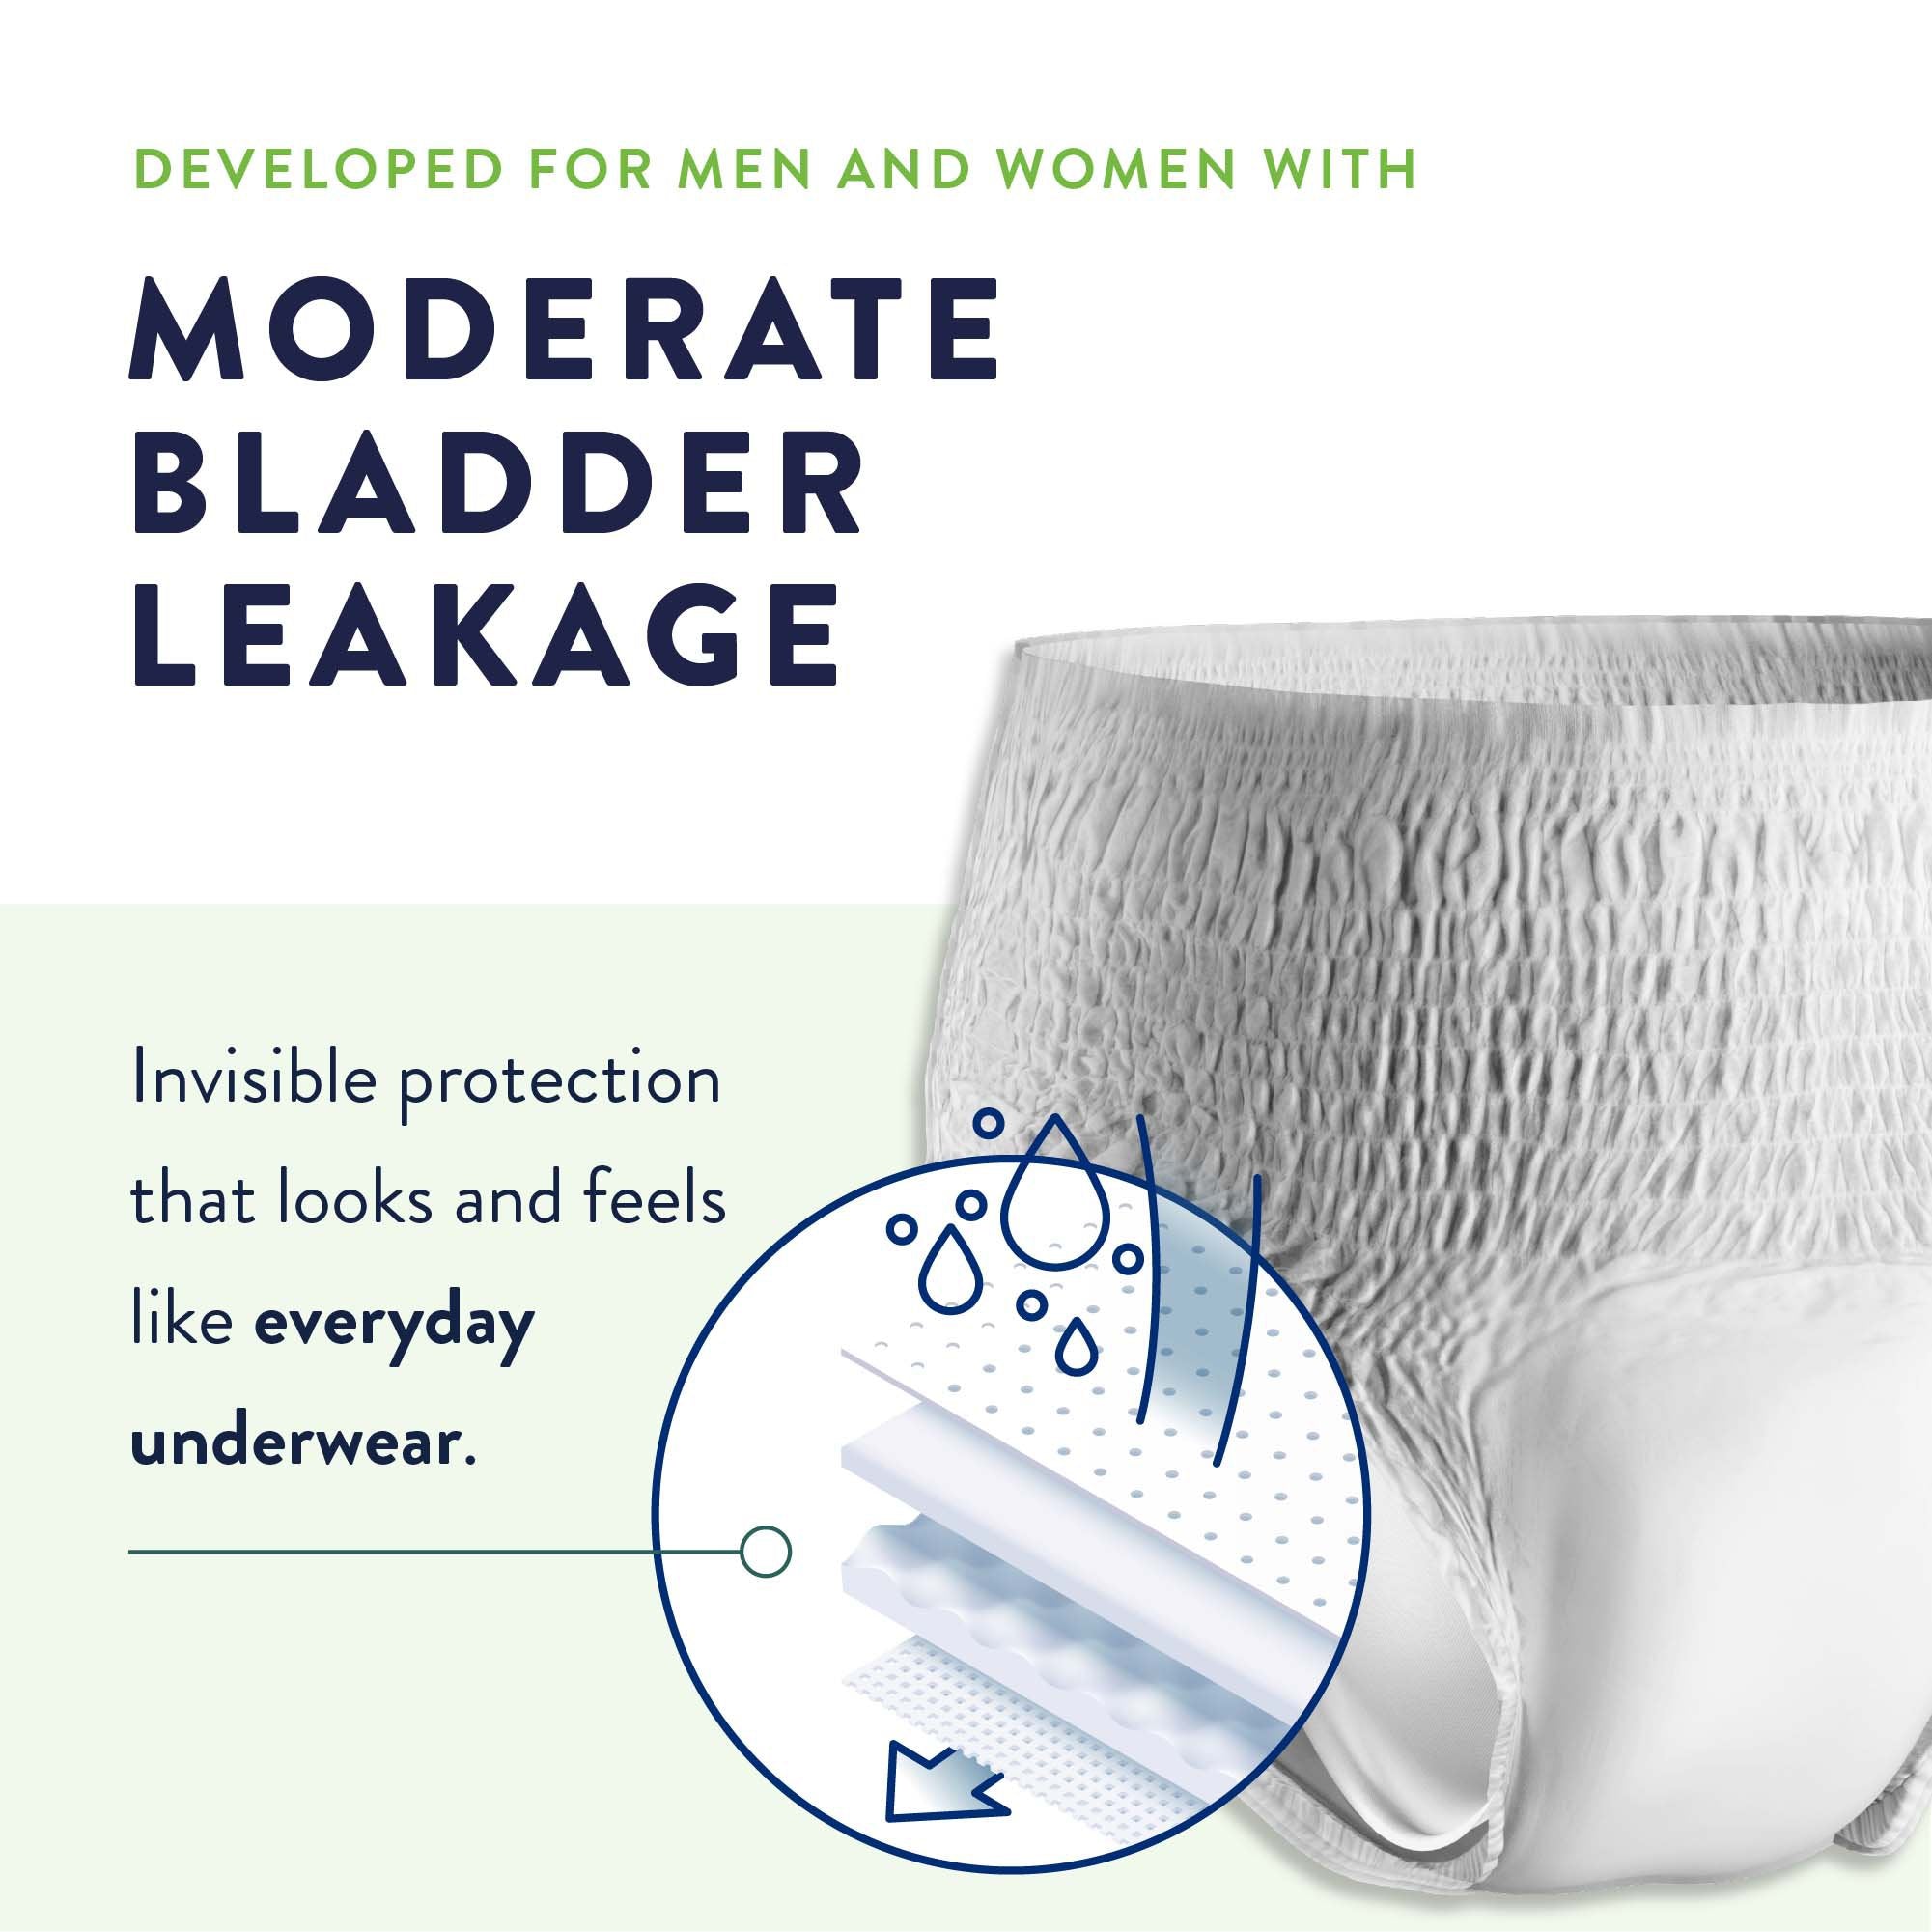 Unisex Adult Incontinence Brief Prevail Per-Fit Medium Disposable Heavy Absorbency